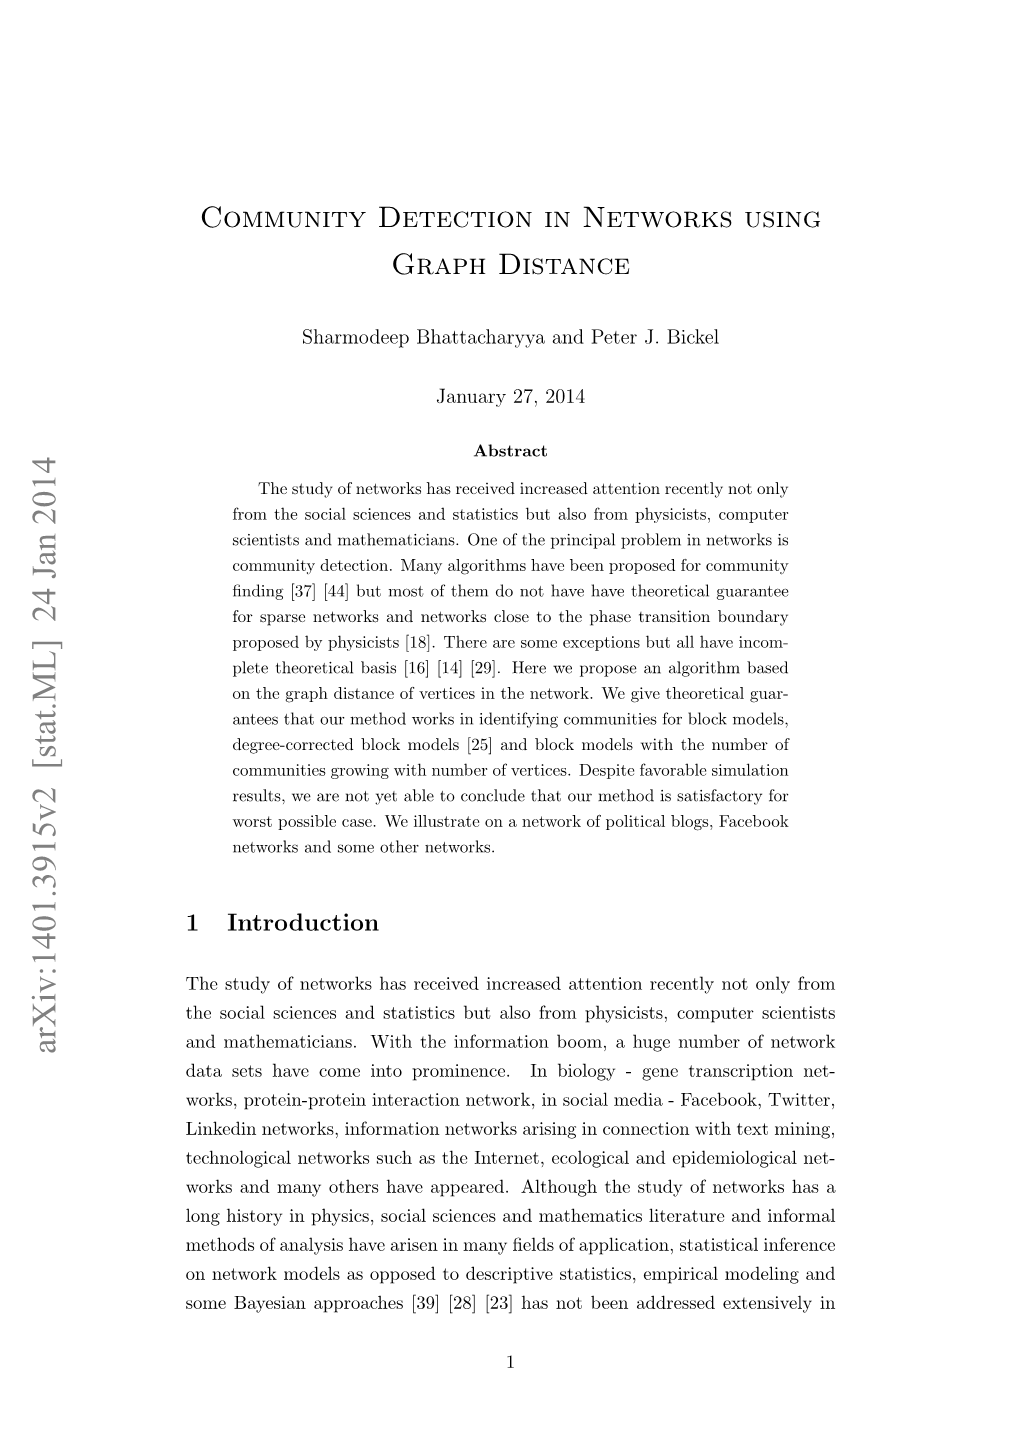 Community Detection in Networks Using Graph Distance